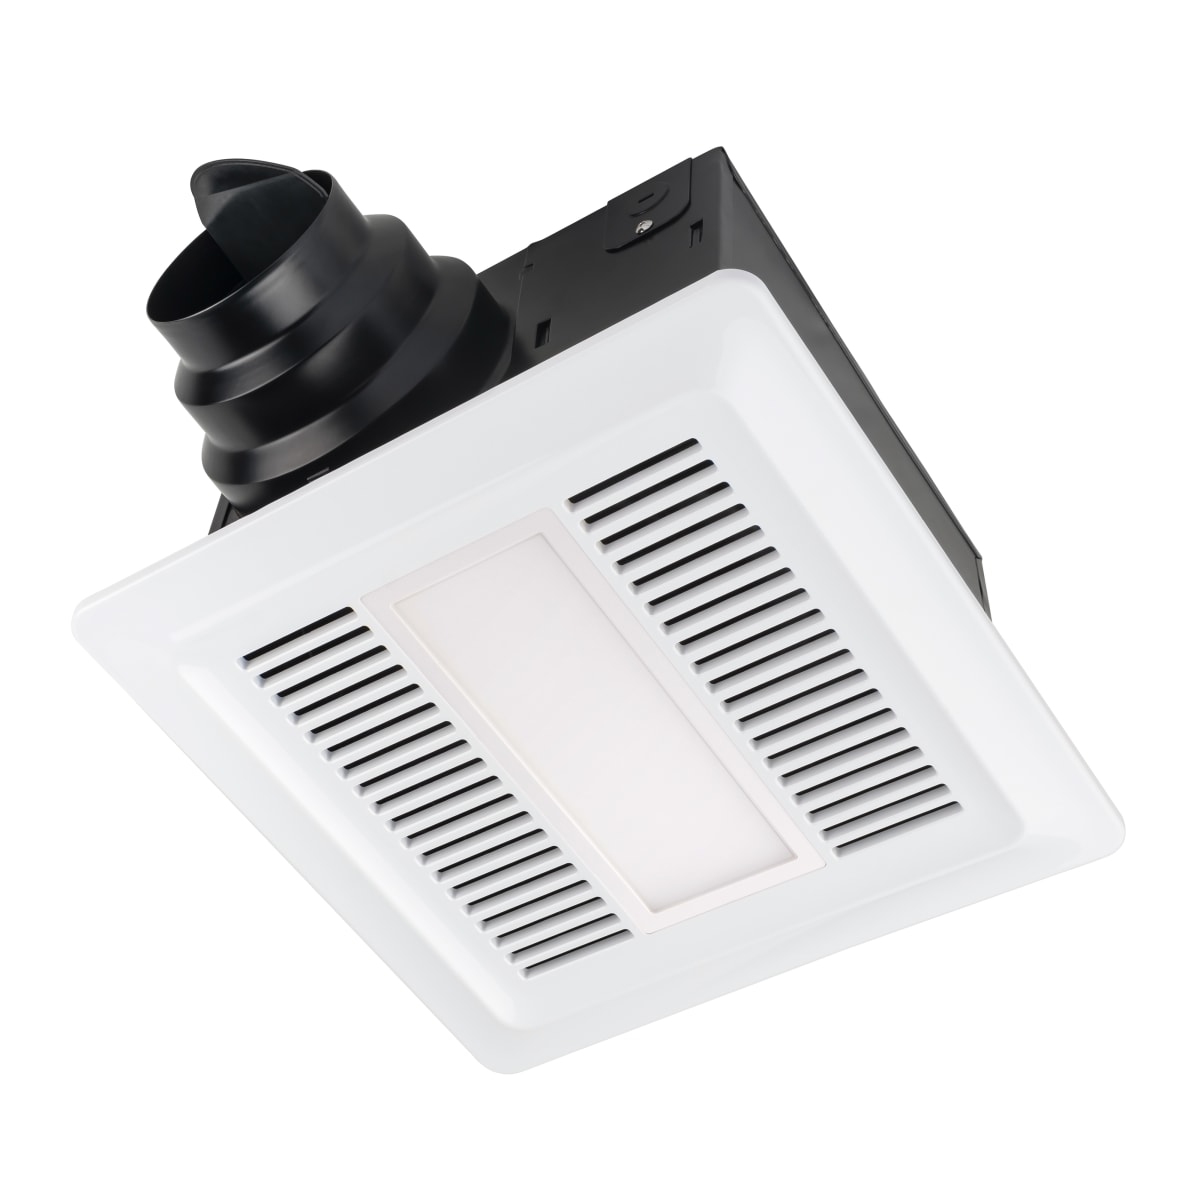 Miseno MBF100LWH 110 CFM Ultra Quiet 0.7 Sones Energy Star & HVI Certified Exhaust Fan with LED Lighting